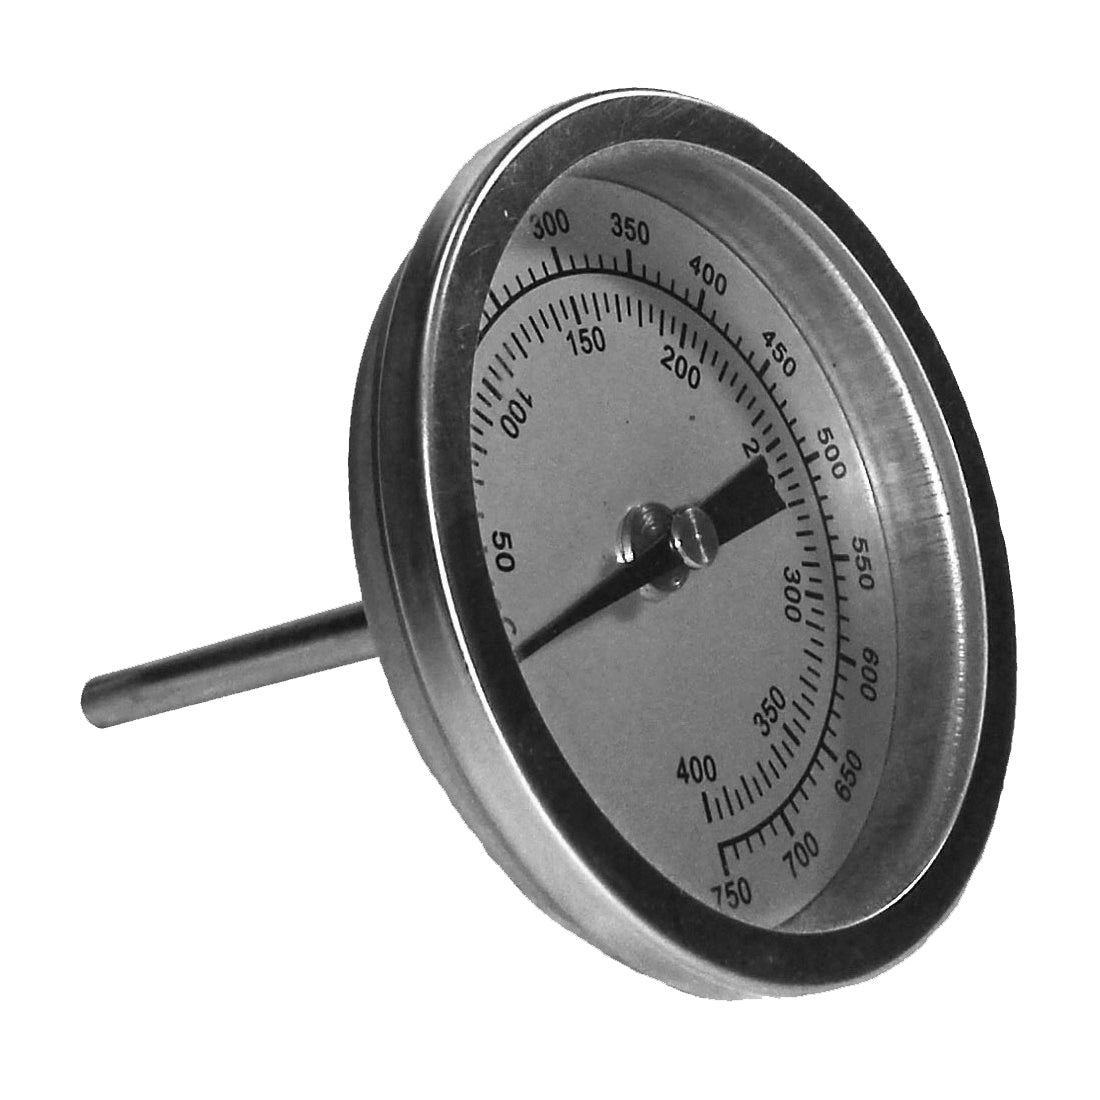 Pit Boss Dome Thermometer With Bezel, 74409